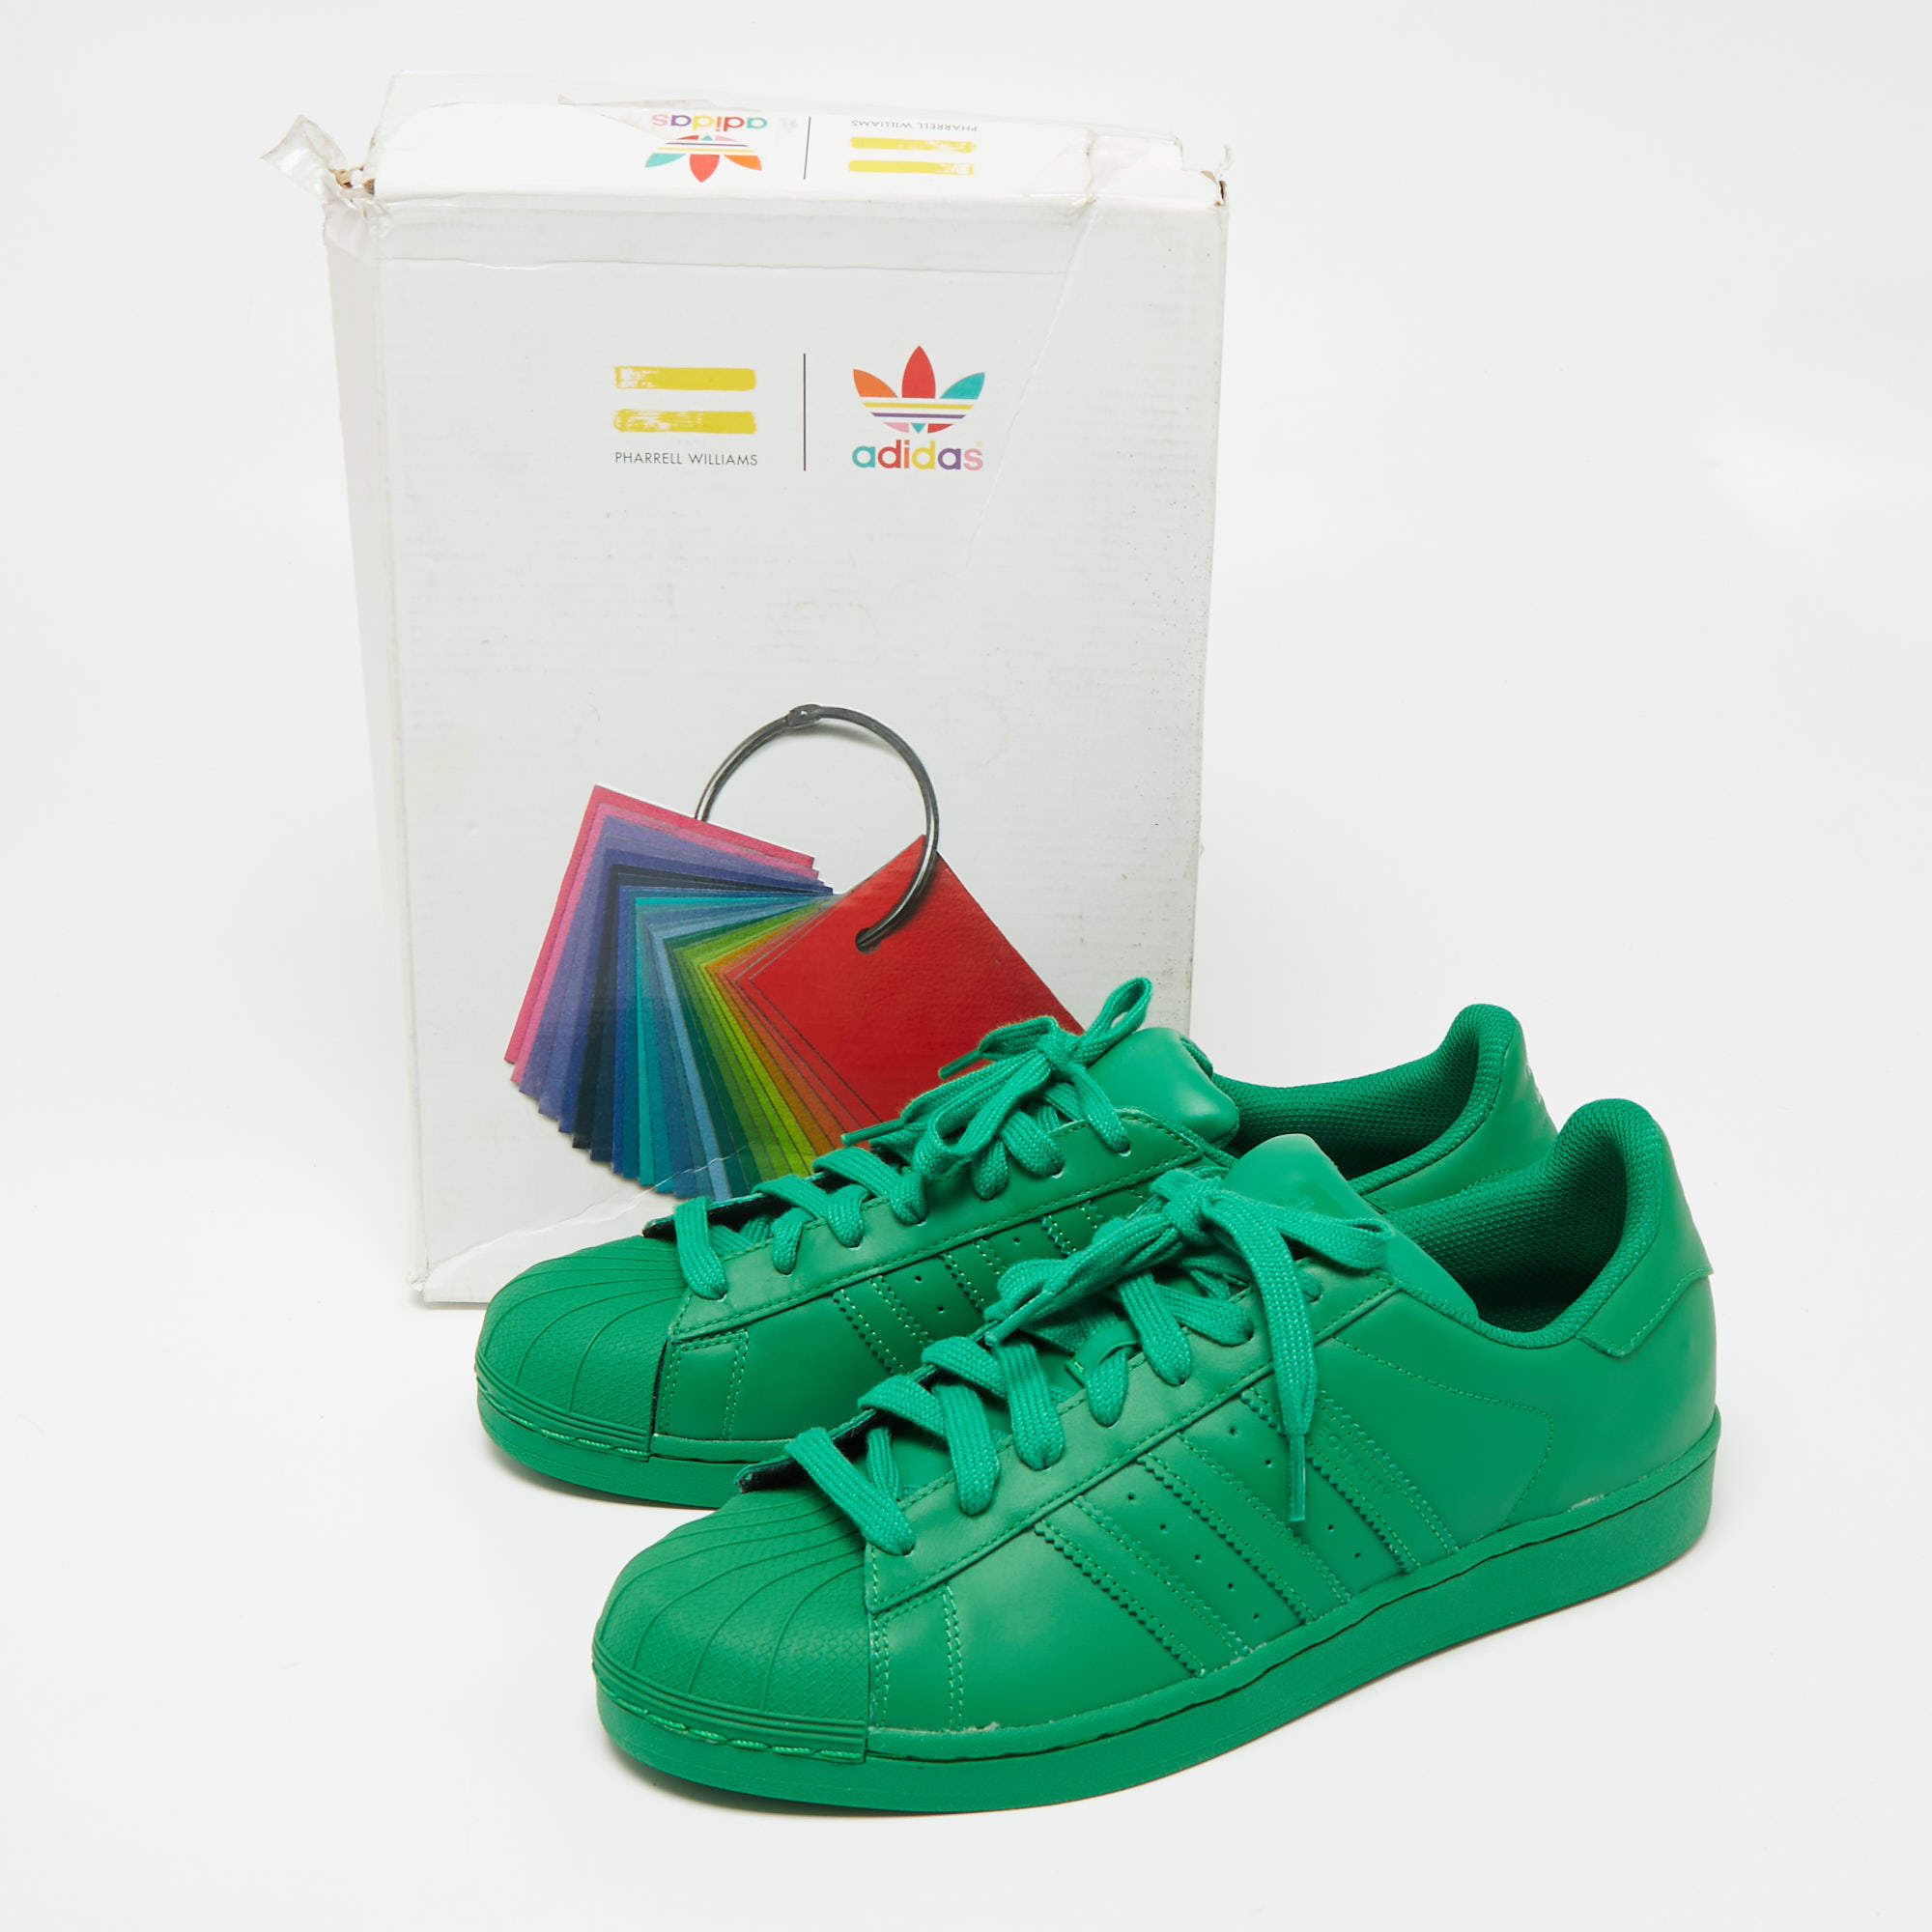 ADIDAS X PHARRELL WILLIAMS Superstar Supercolor Red Flat leather sneakers